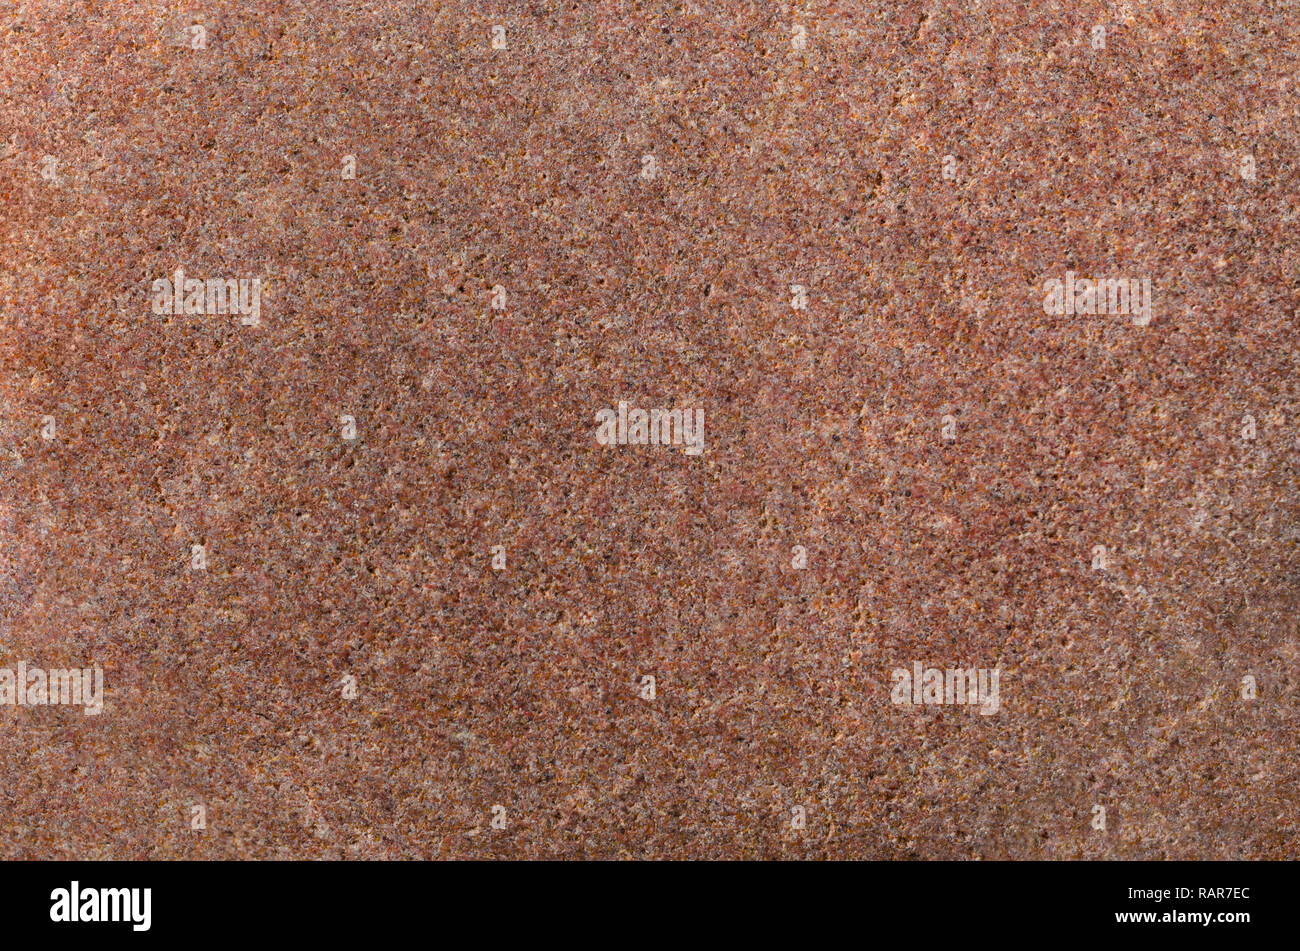 Close up (macro) of stone texture in brown and pink hues. Stock Photo